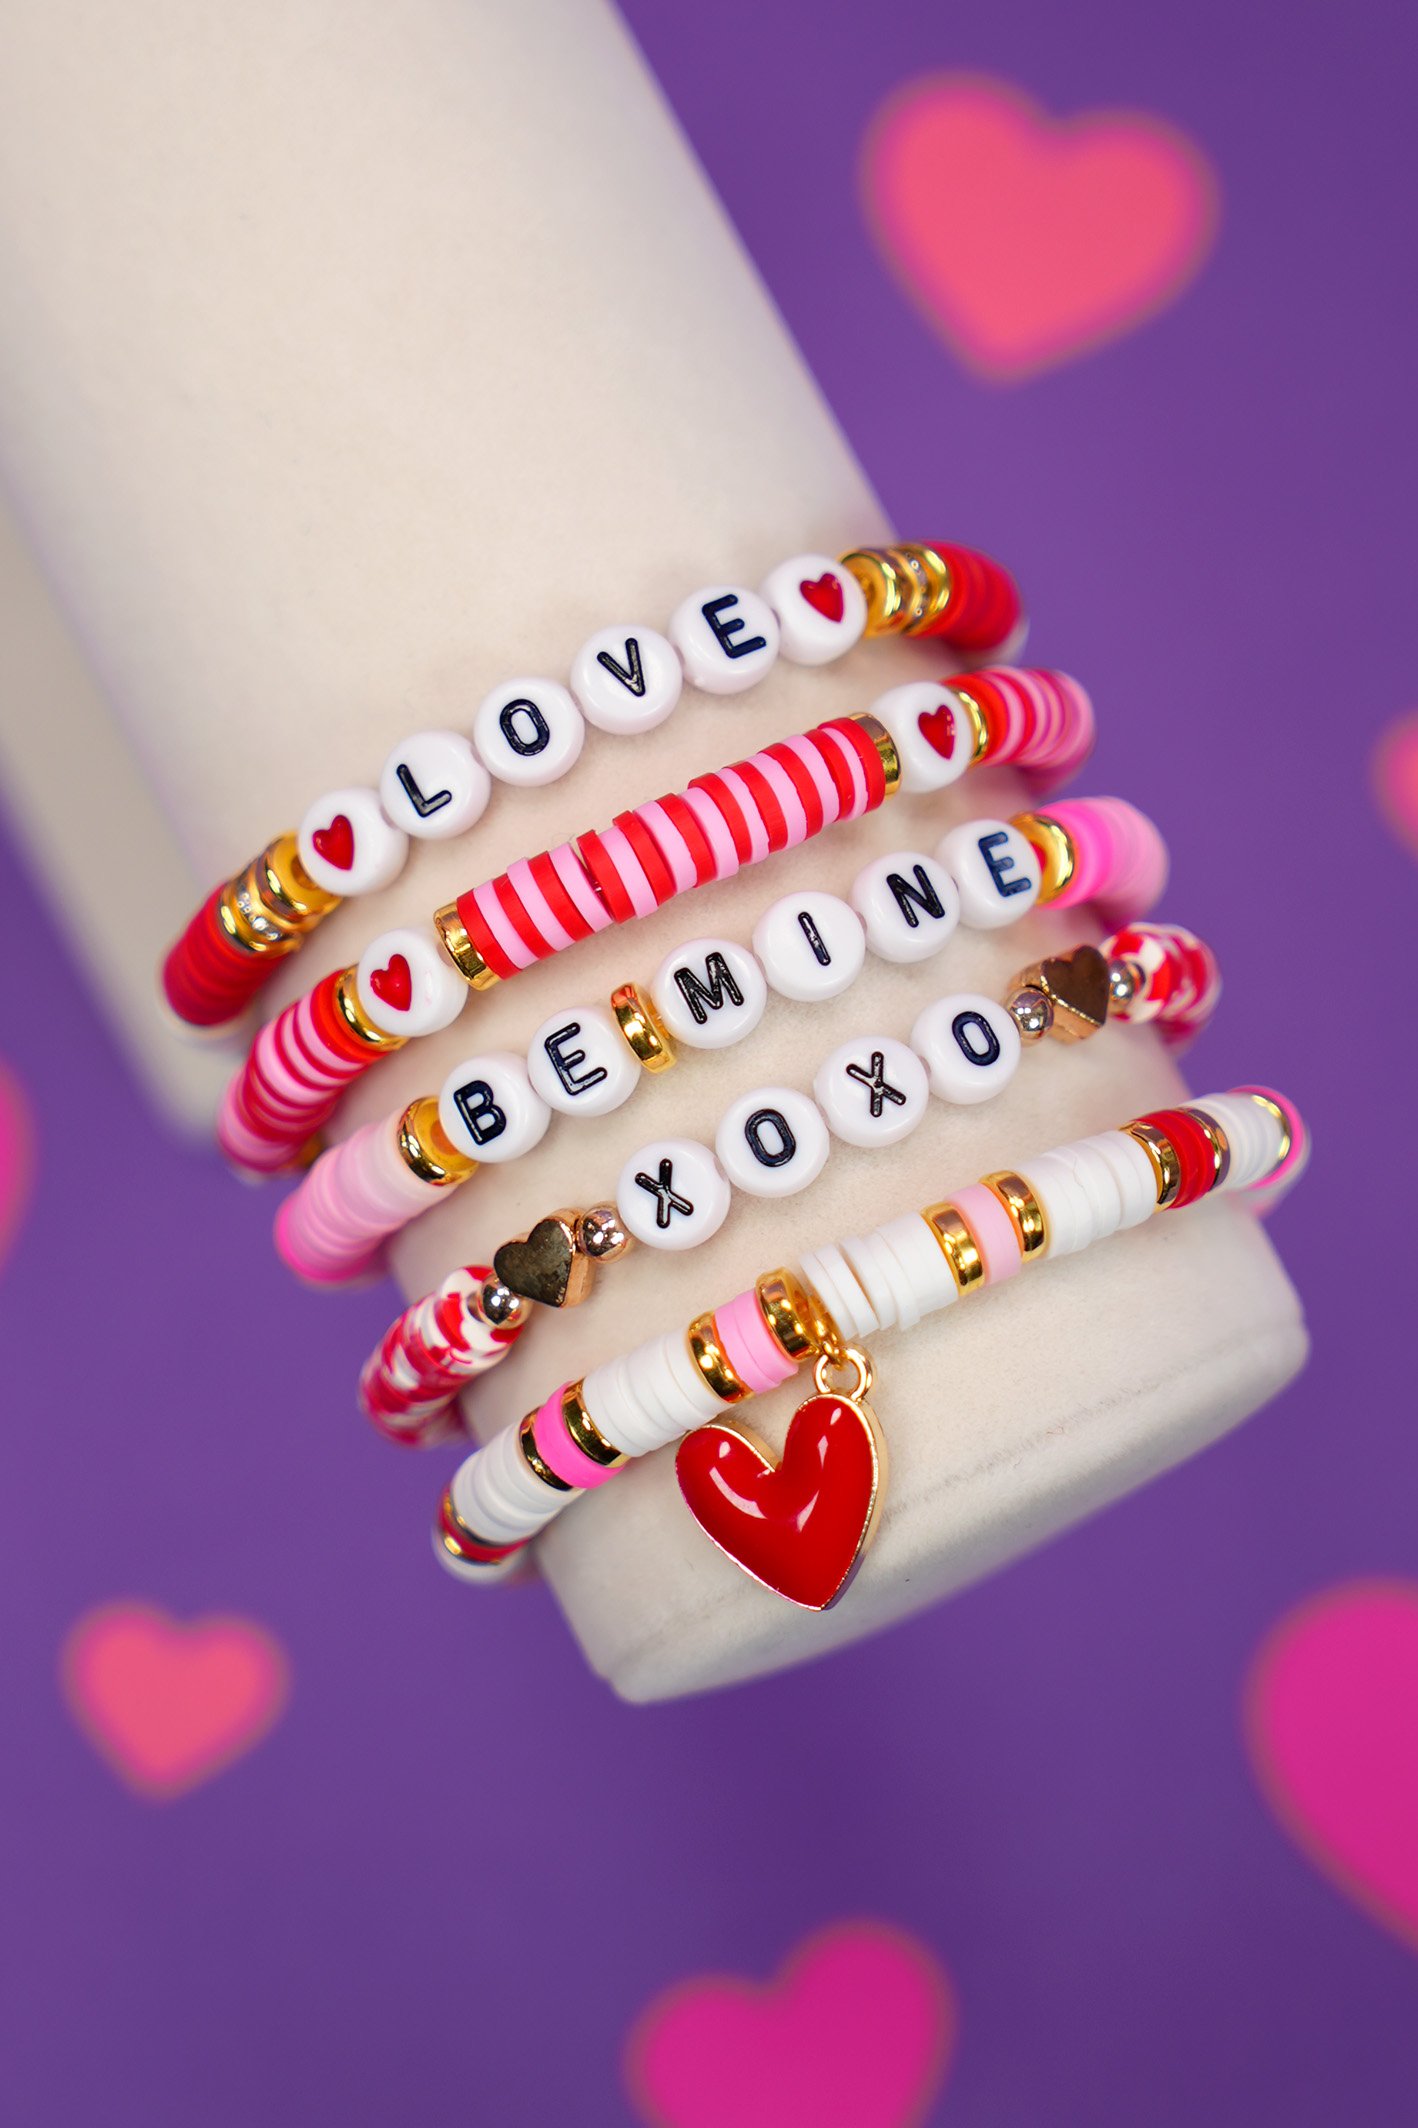 Close up of Valentine's Day bracelet set with red, pink, and white beads on display arm on purple background with pink hearts